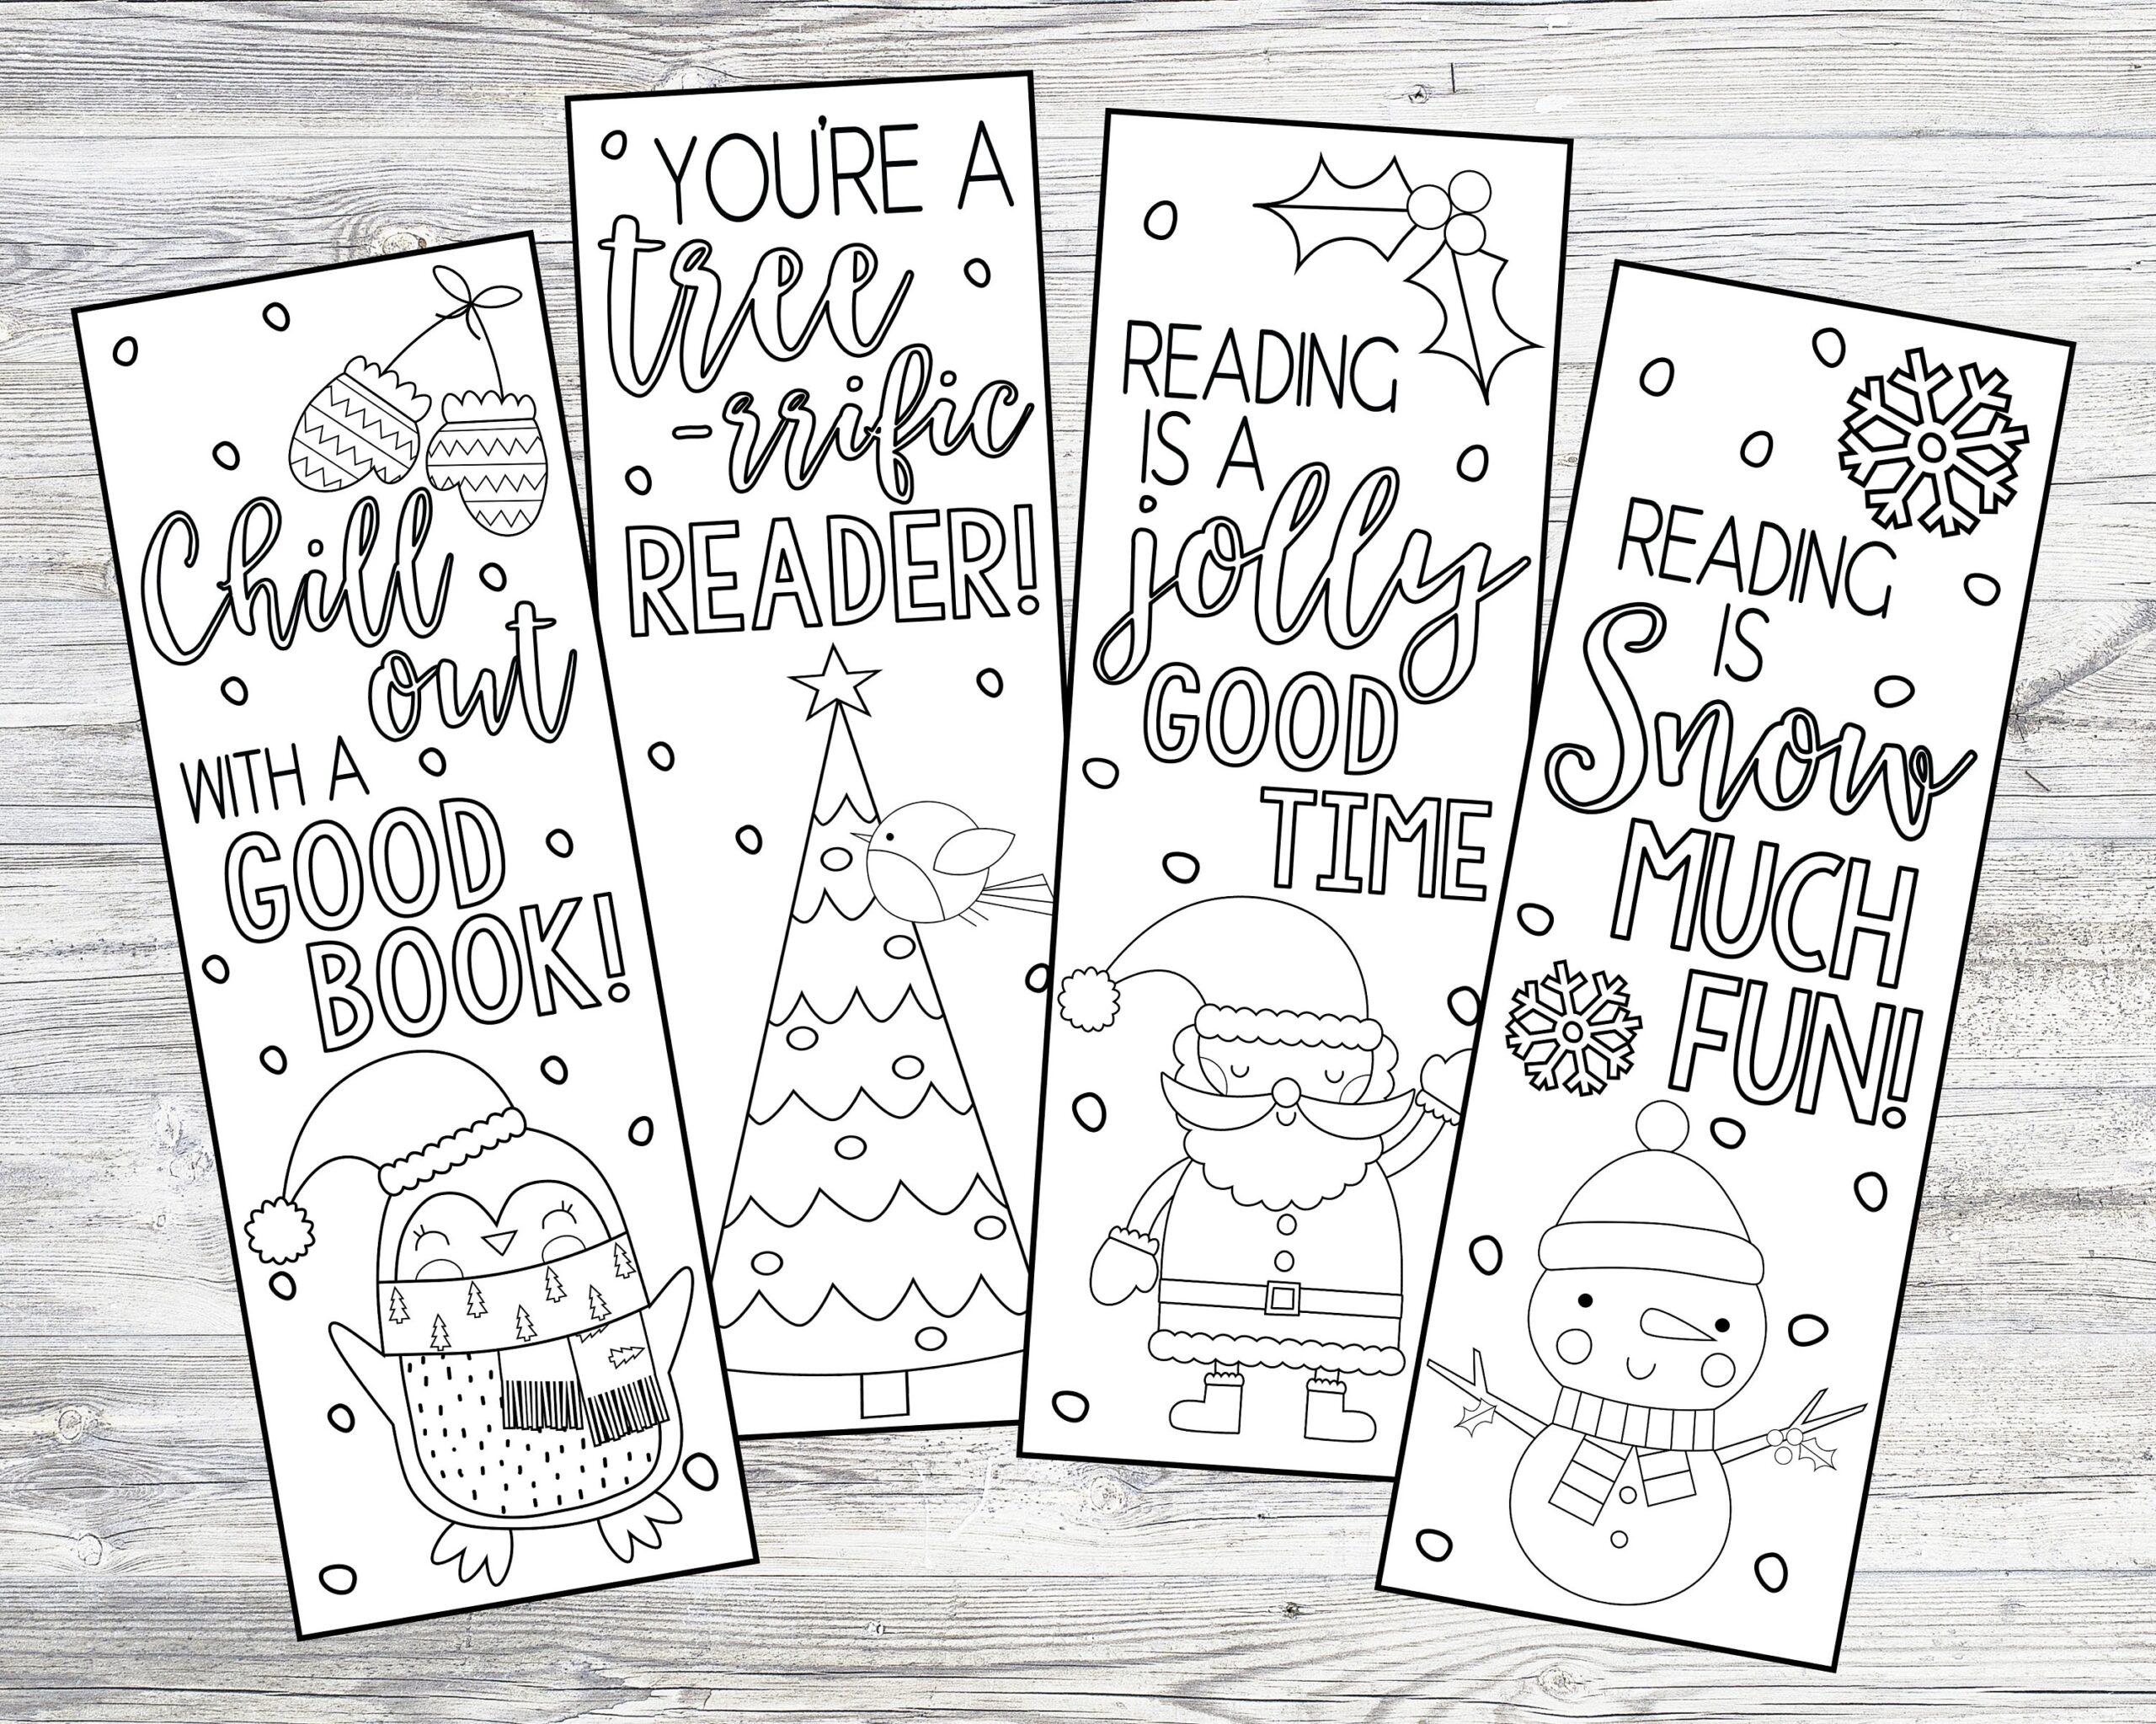 Printable Color Your Own Christmas Winter Bookmarks Instant Digital Download DIY Coloring Bookmarks Santa Snowman Penguin Tree Bookmarks Etsy - Free Printable Bookmarks For Christmas